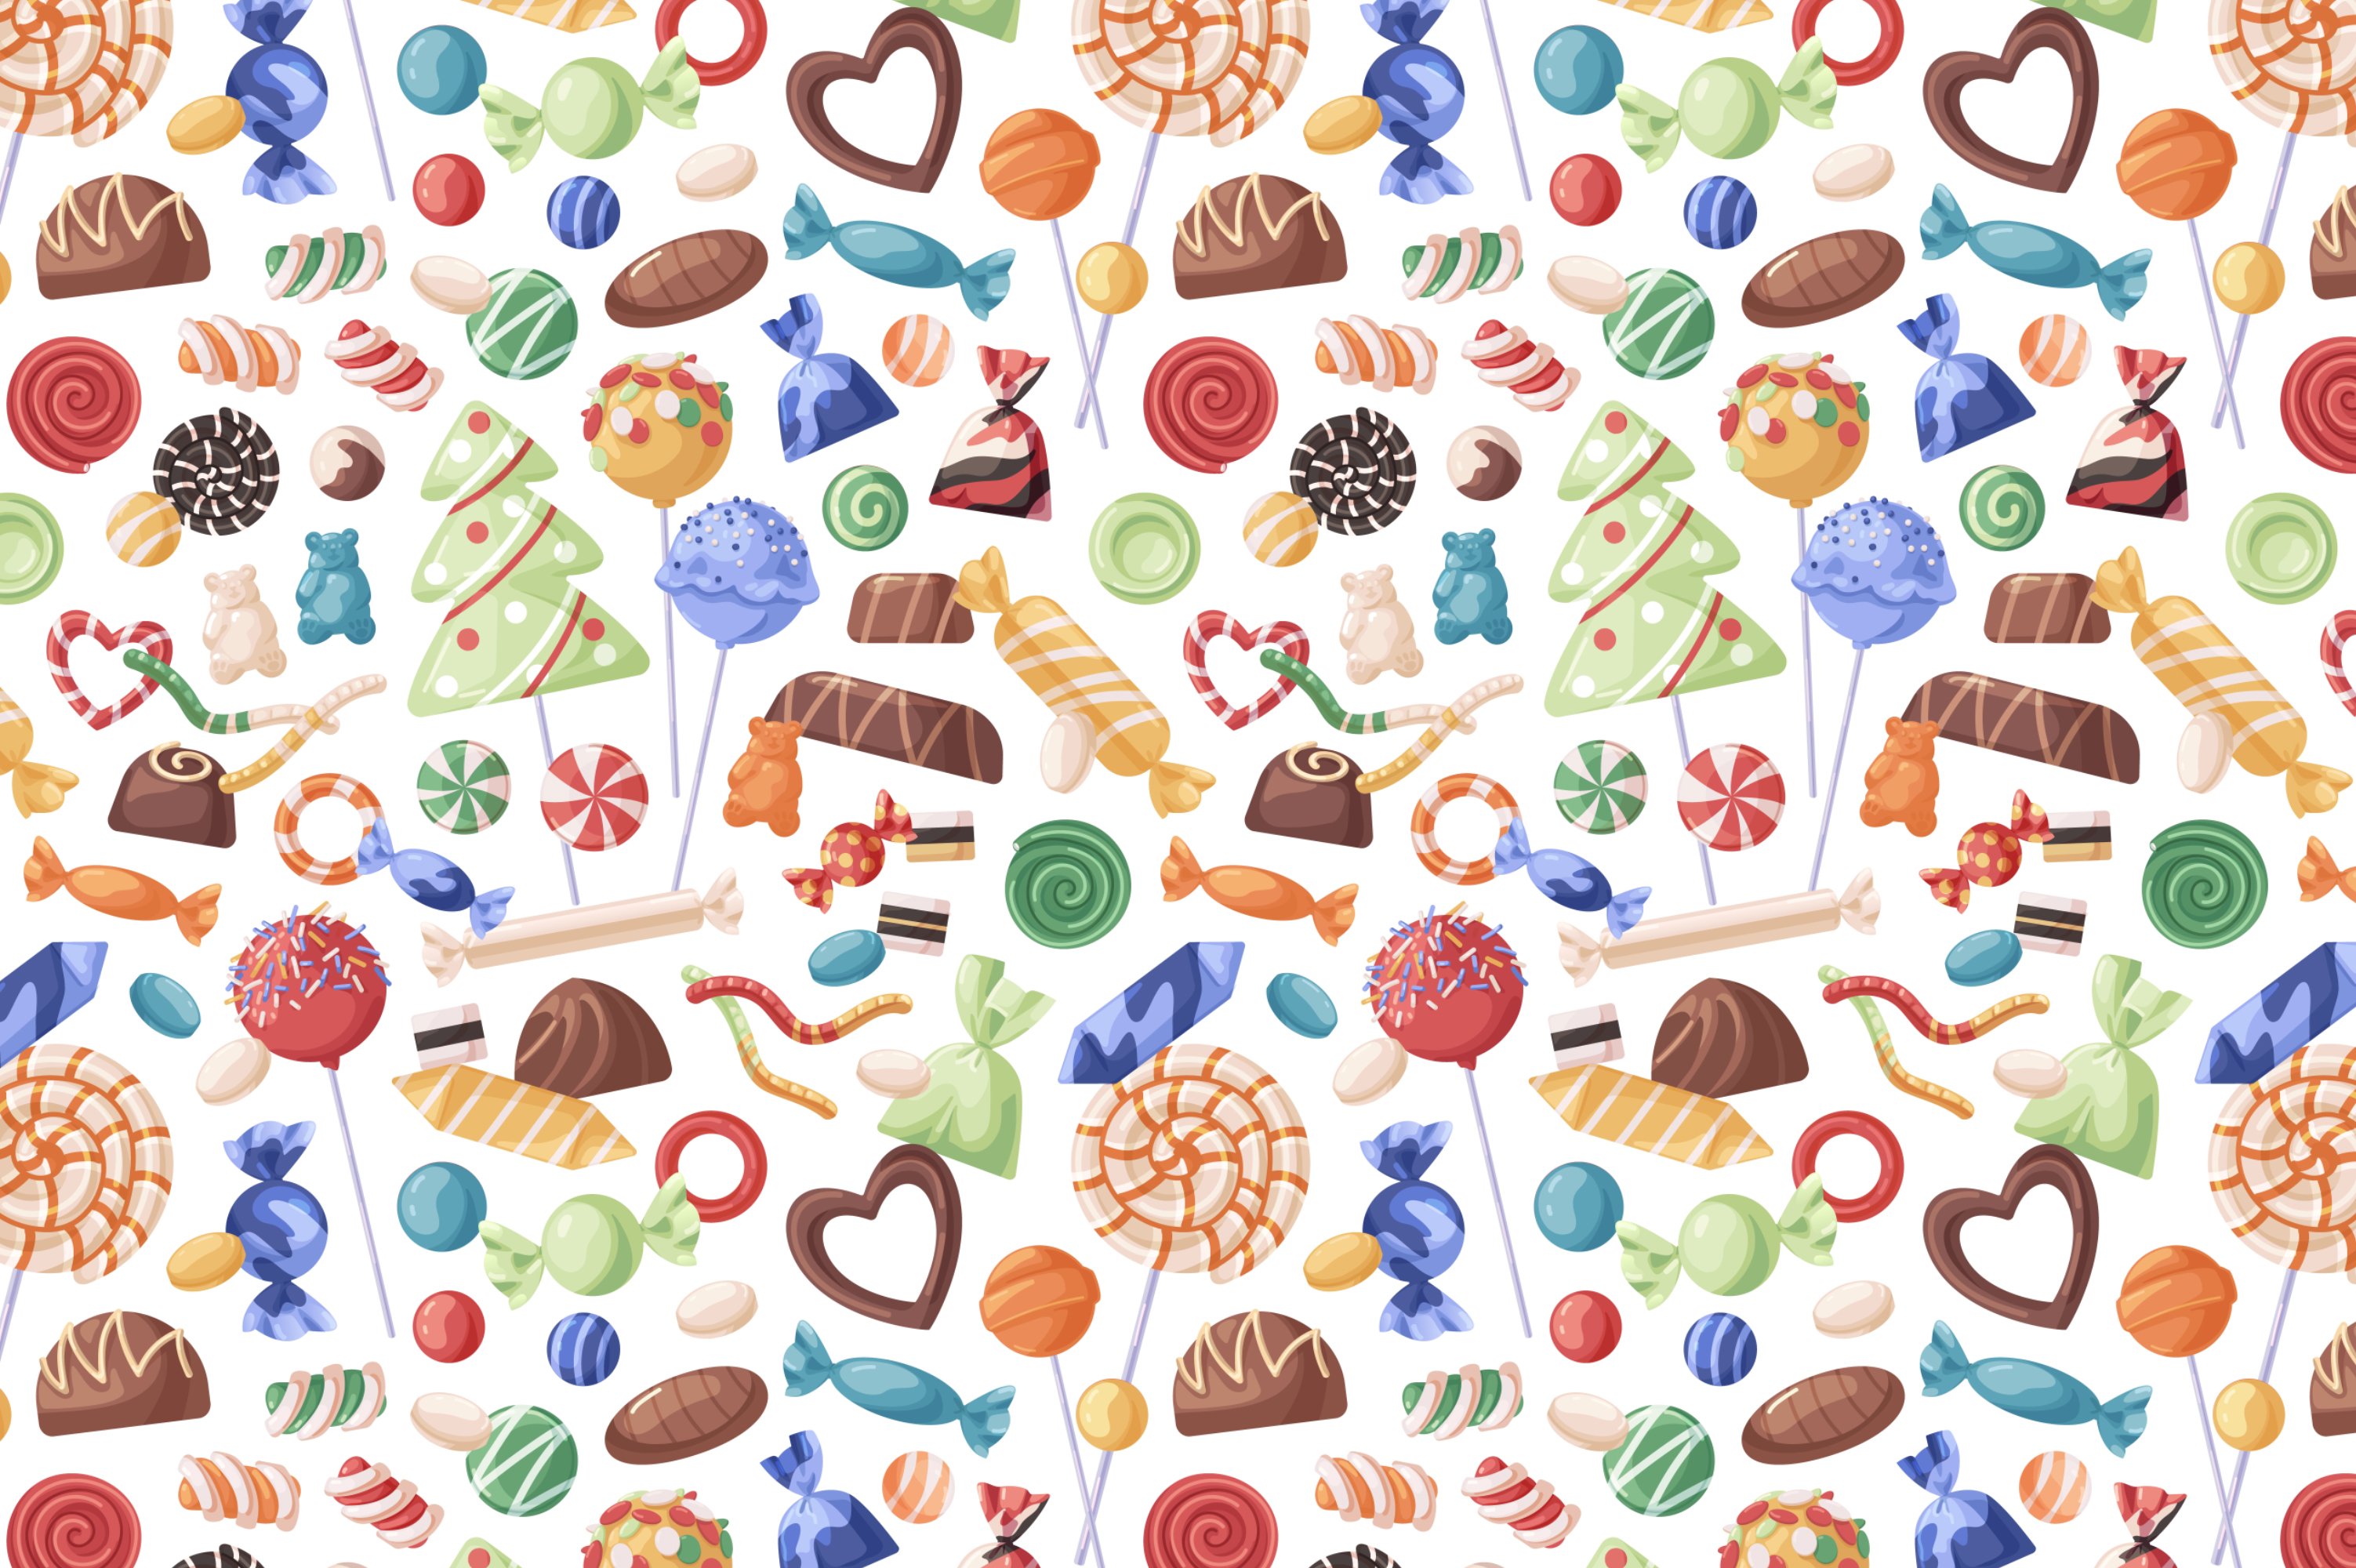 Sweets & candies seamless patterns preview image.